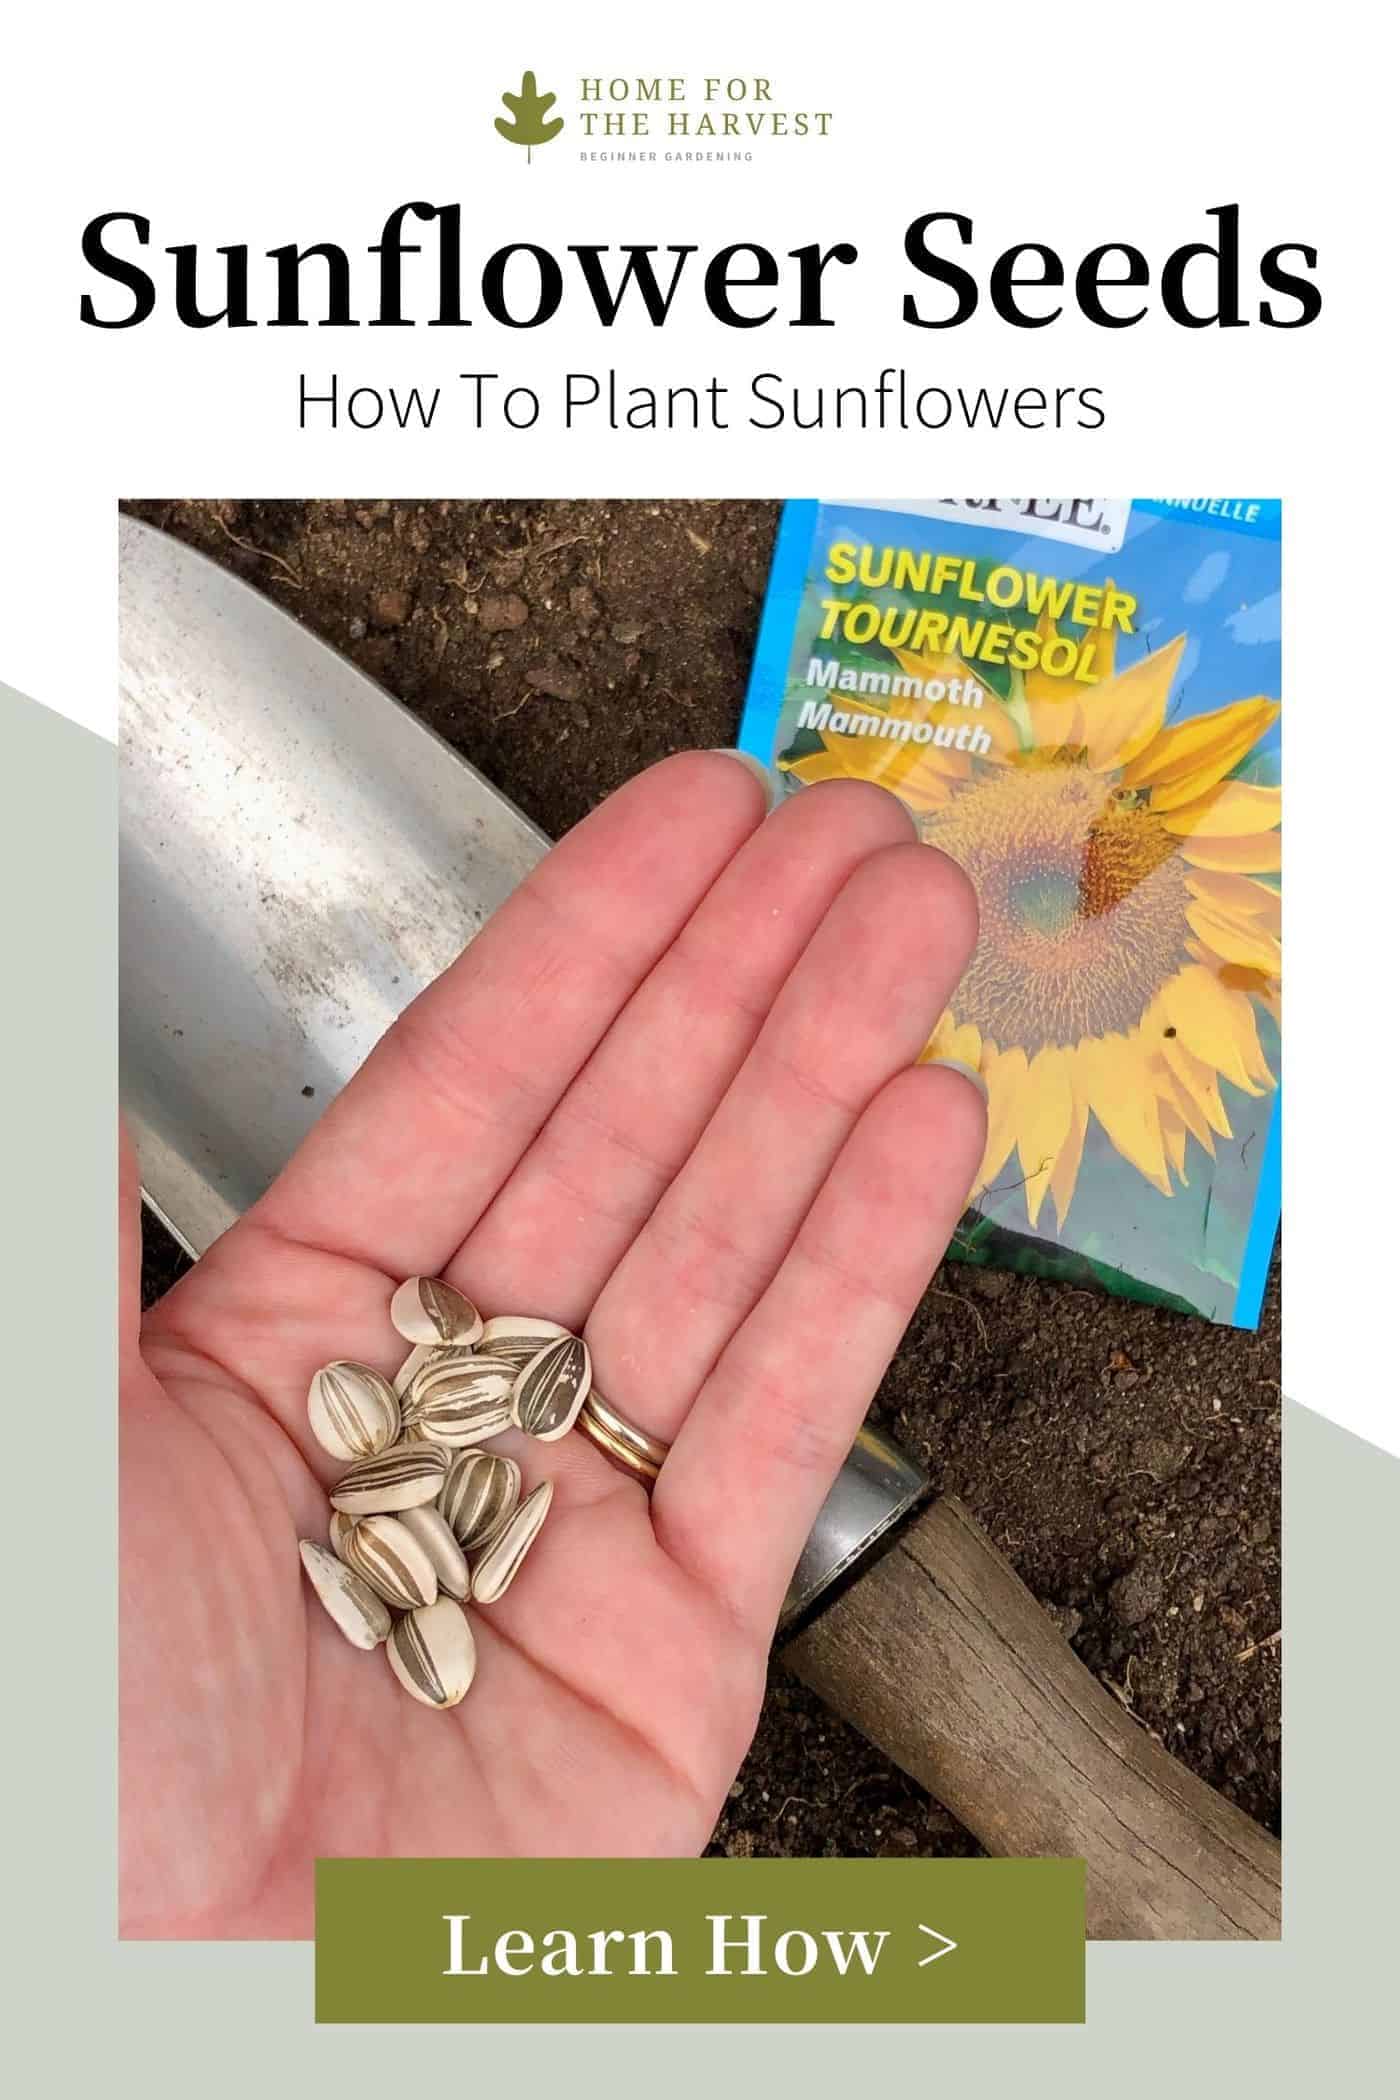 How to Plant Sunflower Seeds in the Garden via @home4theharvest